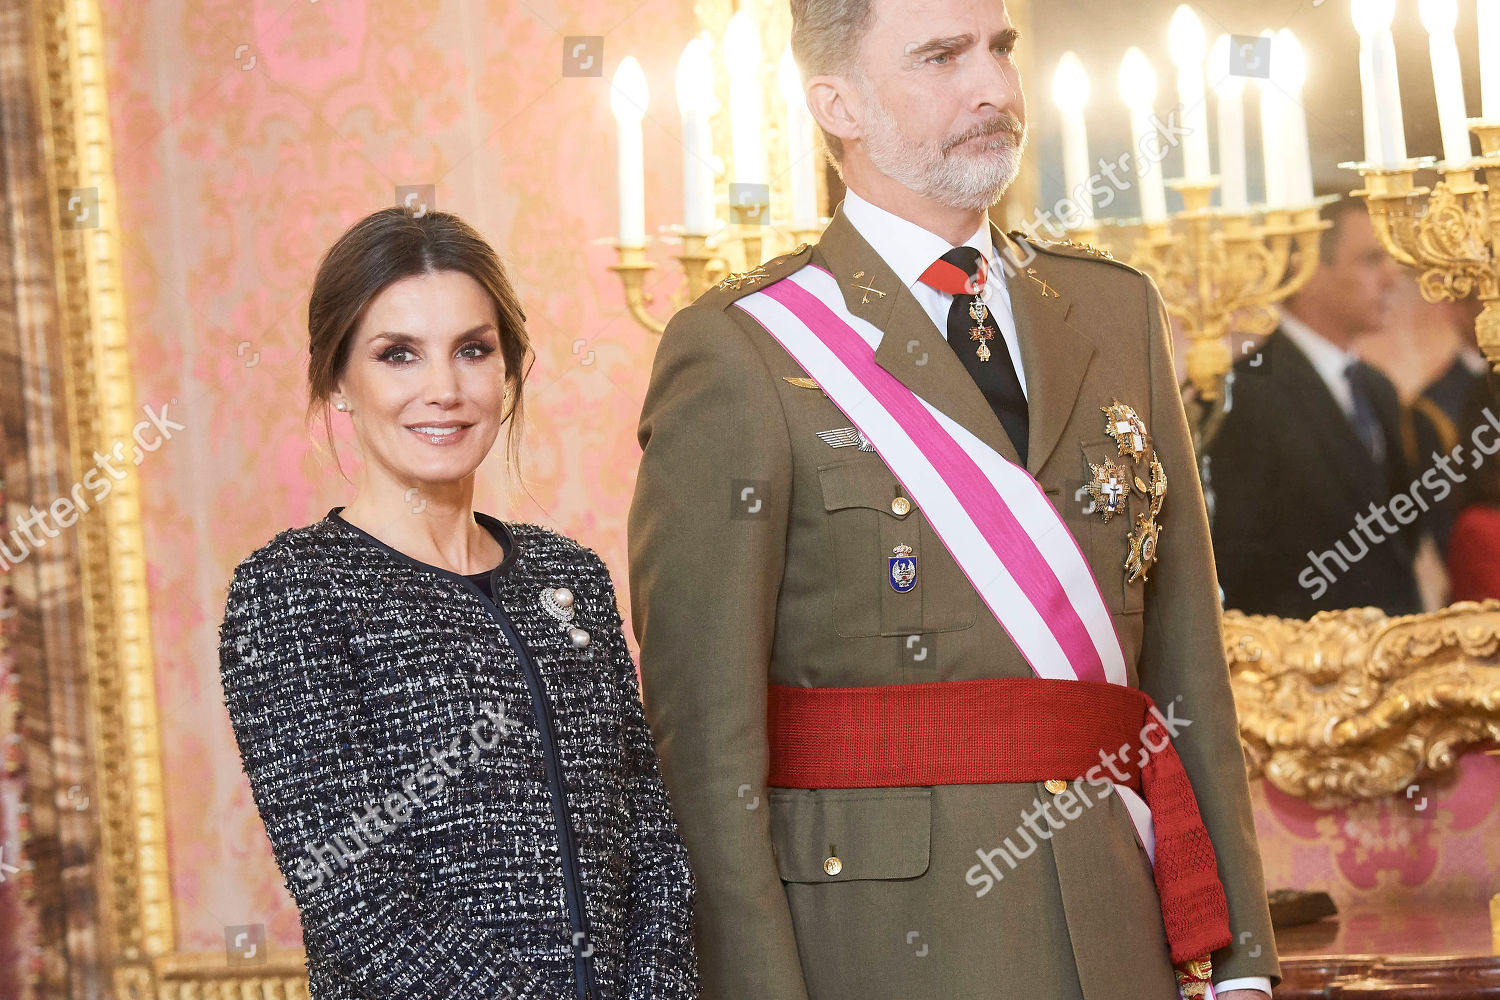 spanish-royals-celebrate-new-years-military-parade-madrid-spain-shutterstock-editorial-10049064ag.jpg